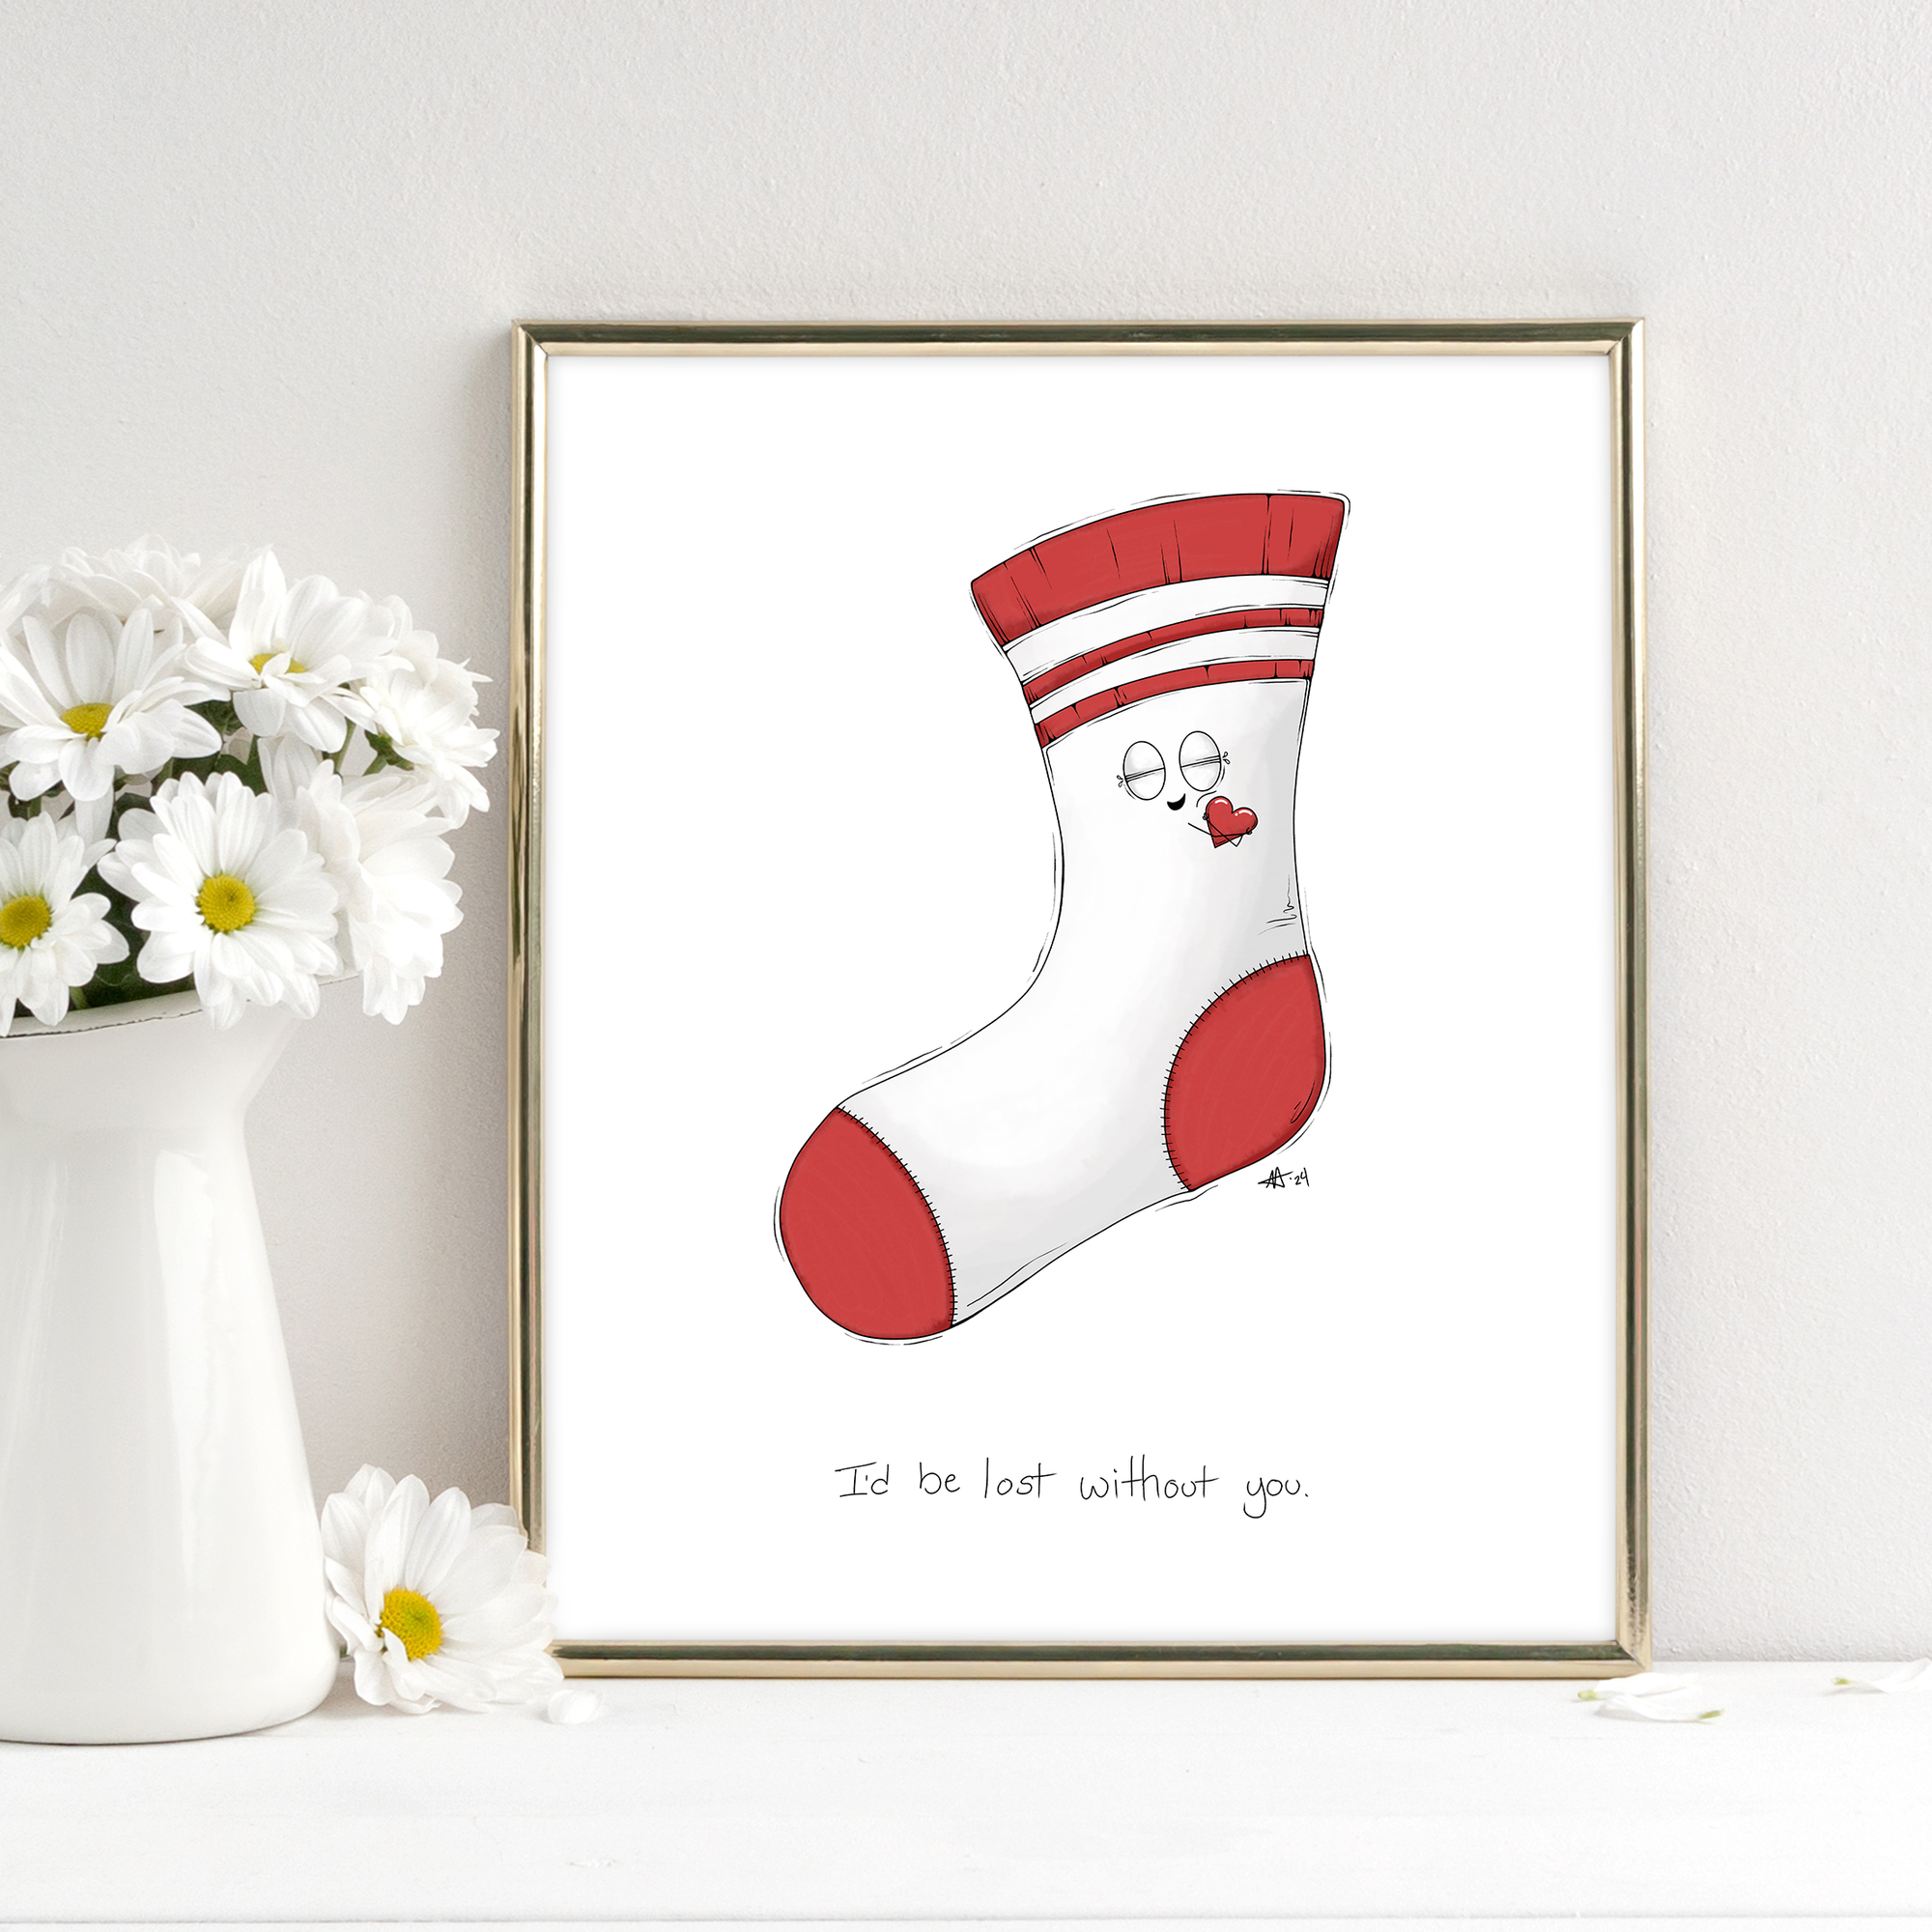 "I'd be lost without you." - Fine Art Print